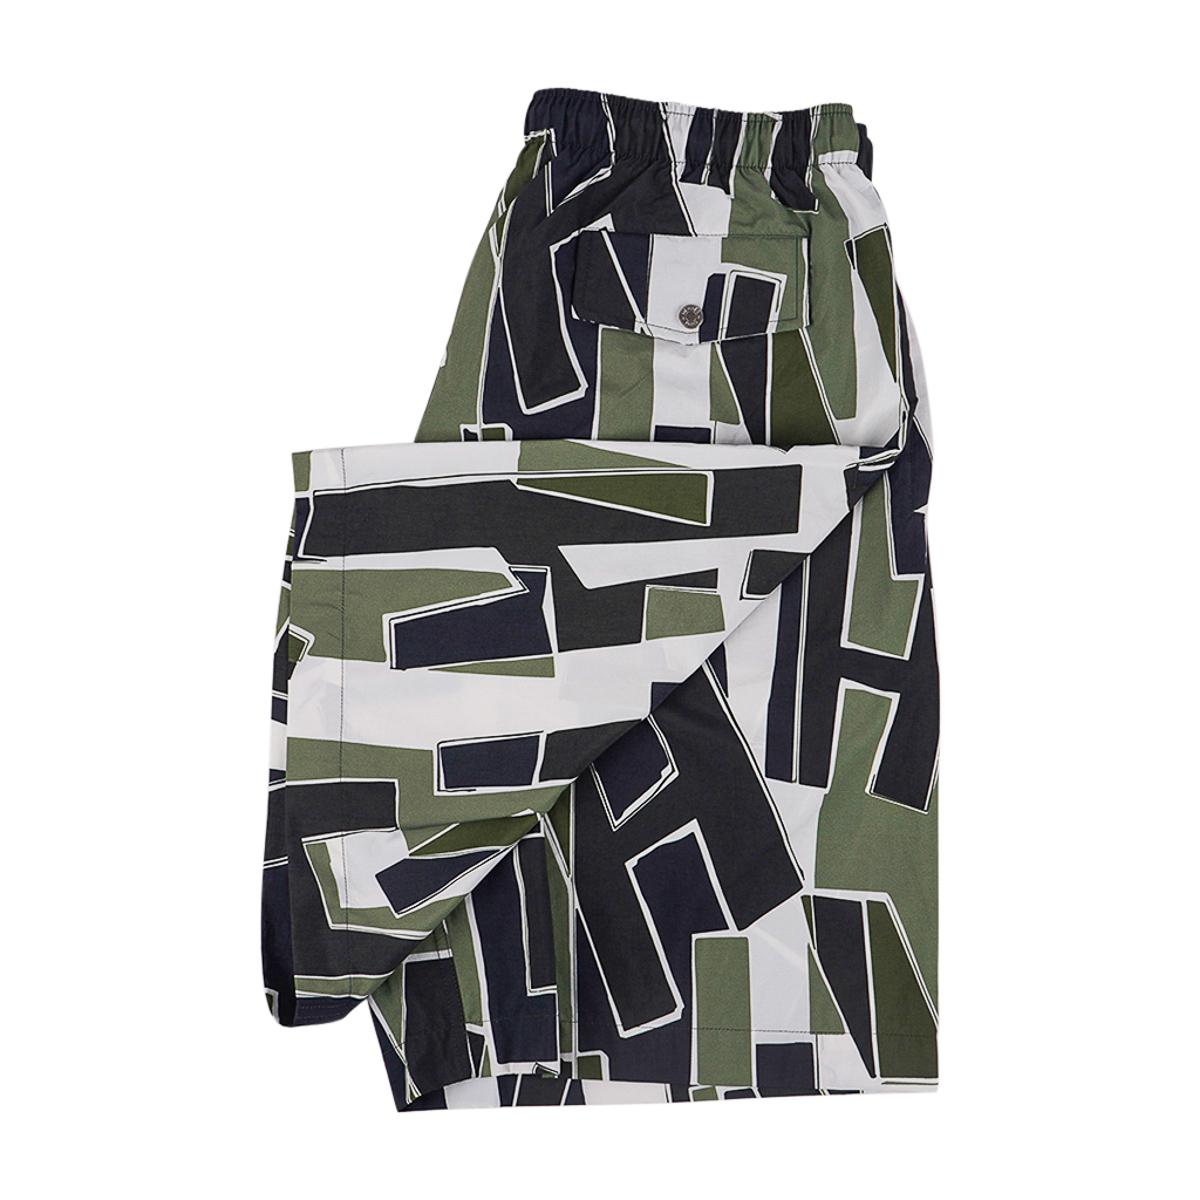 Hermes long swim trunks featured in Decoupage de H print.
Colorway is Vert-de-Gris.
Trunks have an elastic waistband with drawsting for adjustment.
2 side pockets and 1 rear pocket with Clou de selle snap closure.
Fabric is nylon canvas.
Made in